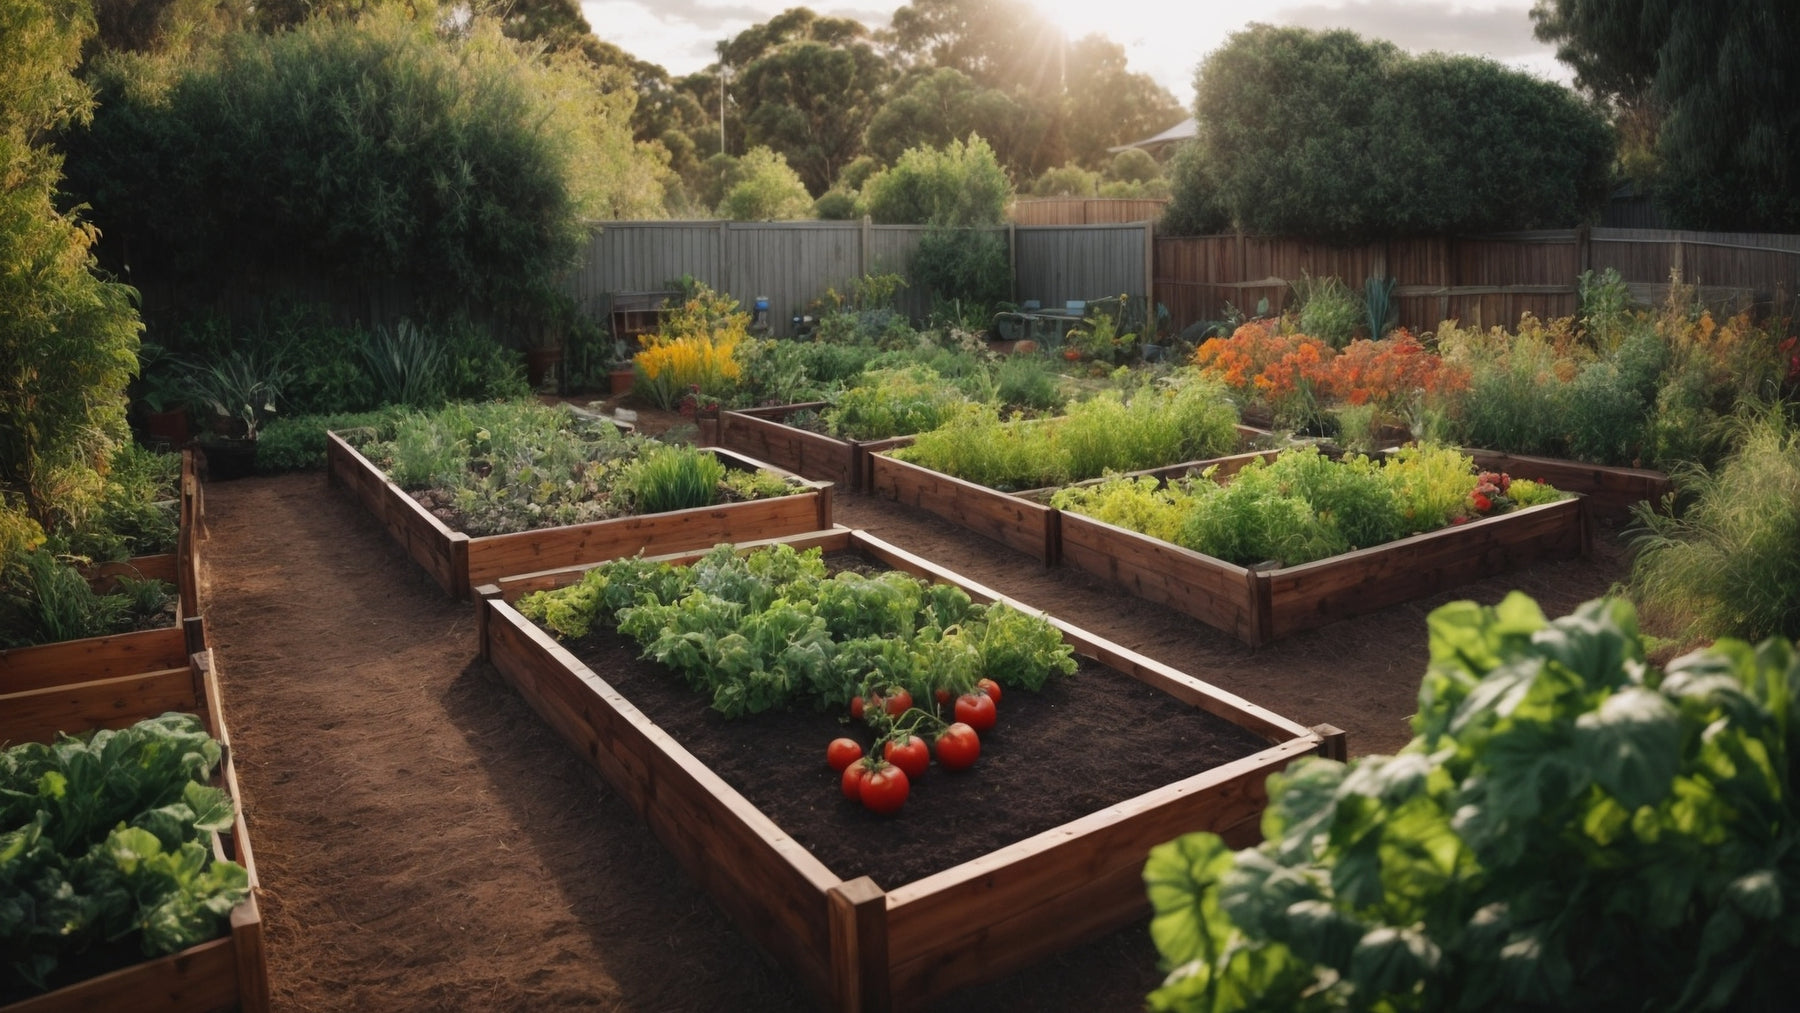 The Advantages of Raised Garden Beds